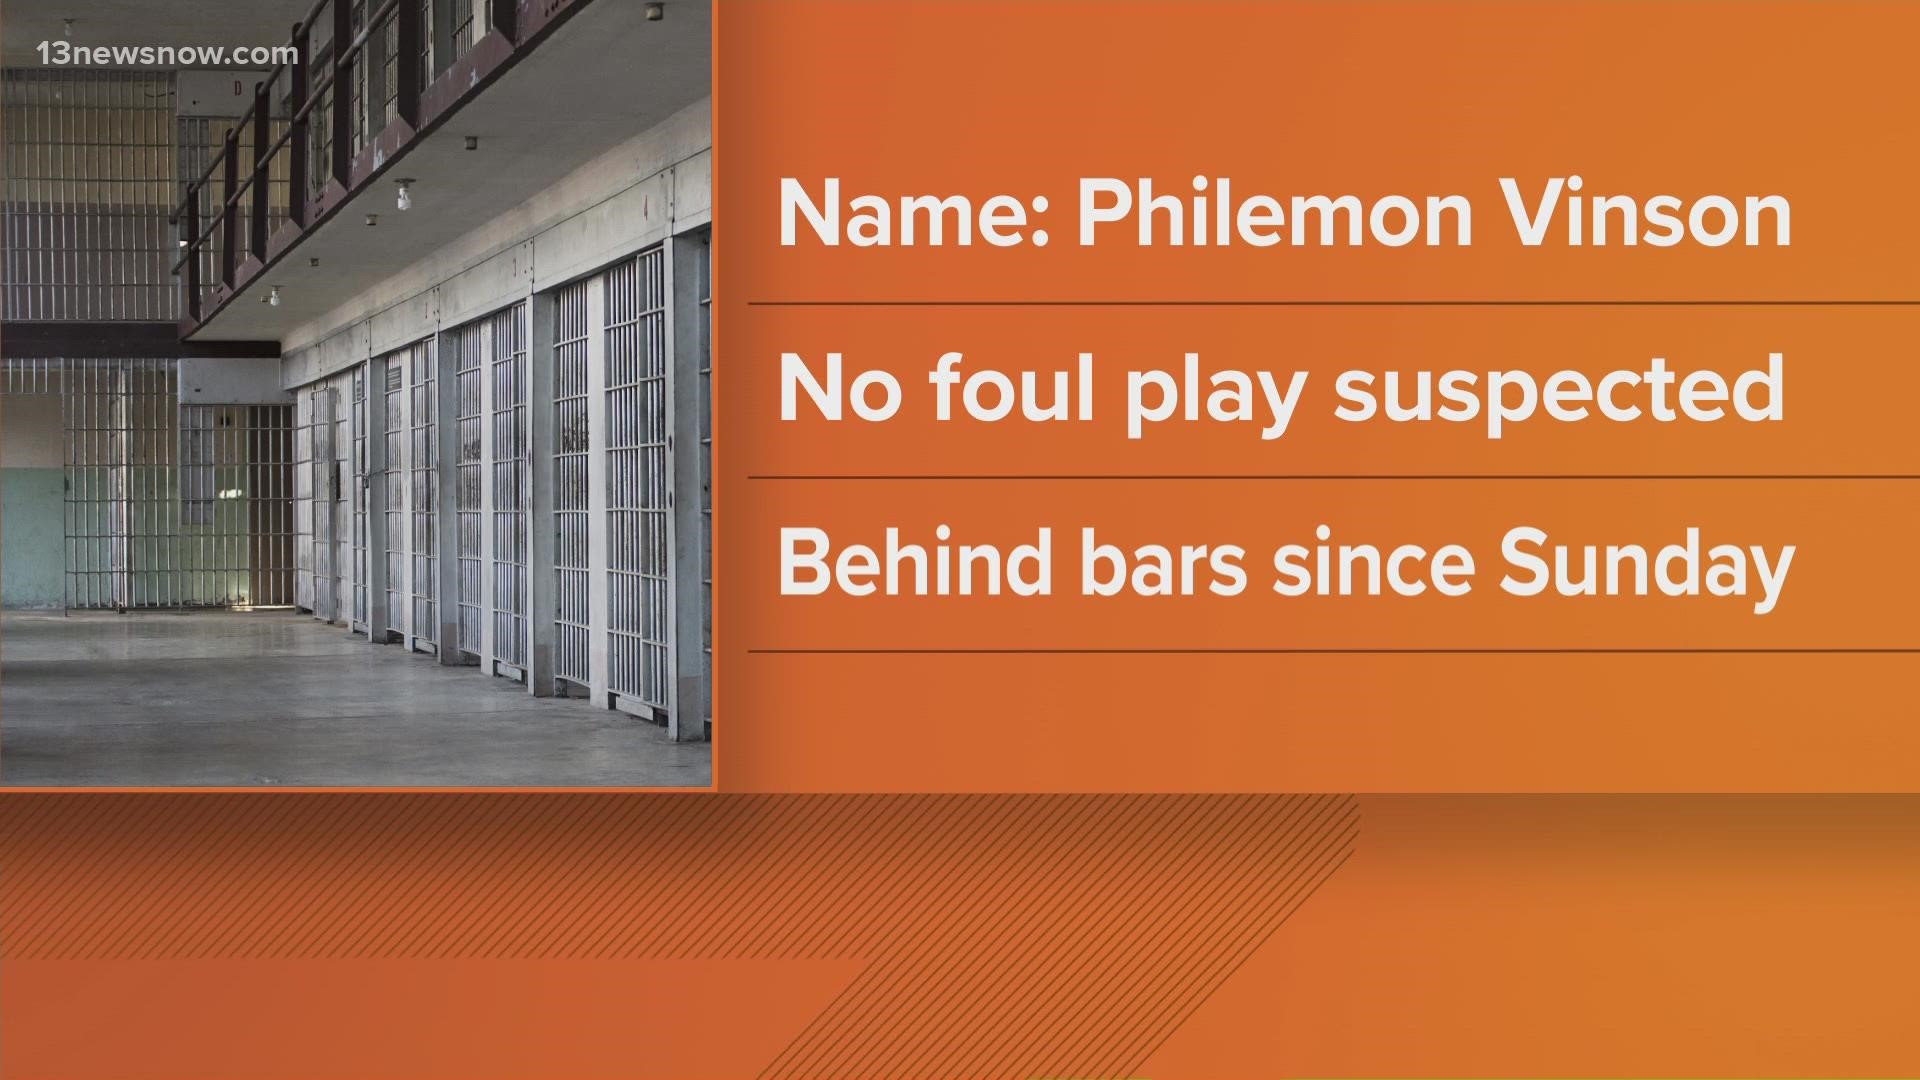 Police say Philemon Vinson, 24, had been in jail since Sunday on a "failure to appeal" charge.